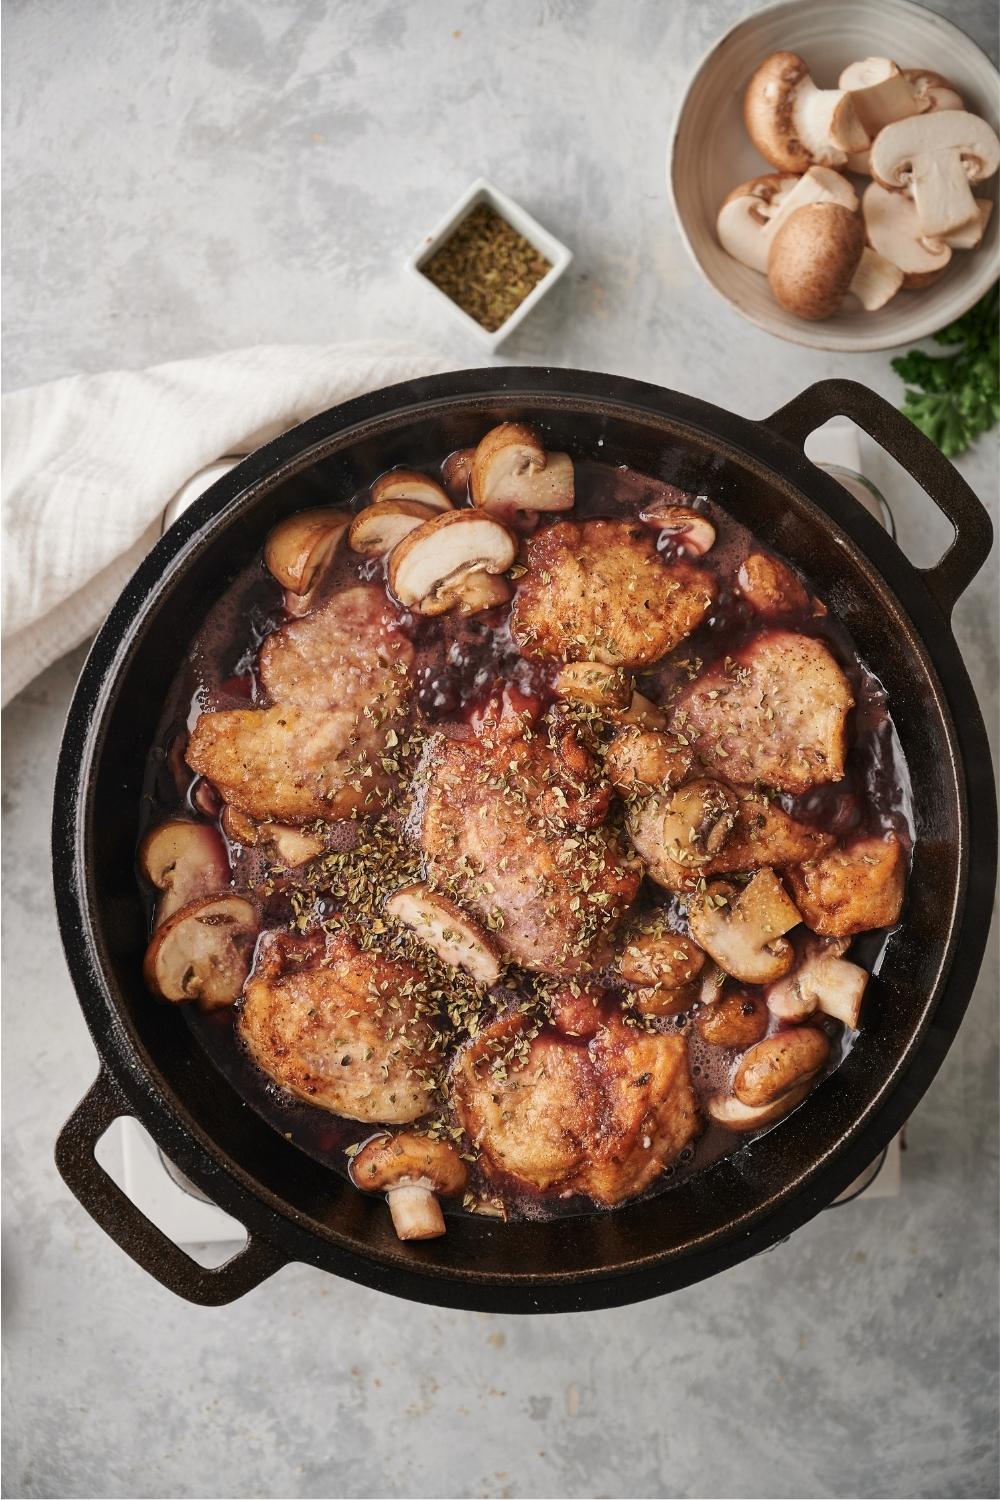 A cast iron pan with cooked chicken marsala in the pan and a small bowl of raw mushrooms and oregano placed next to the pan.